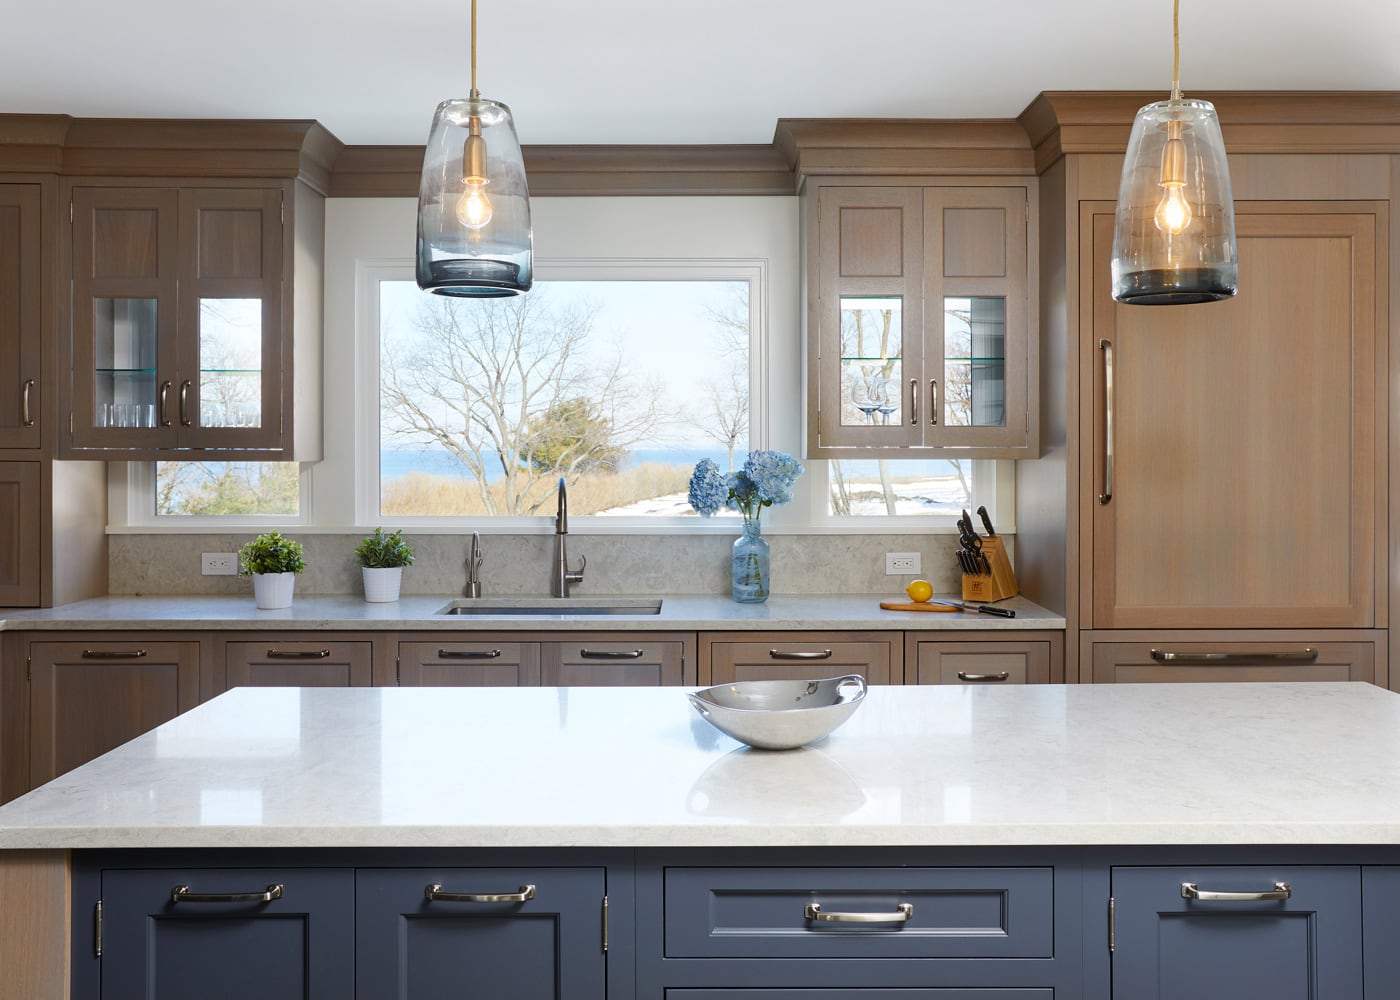 Kitchen interiors designed by Annette Jaffe Interiors on Long Island